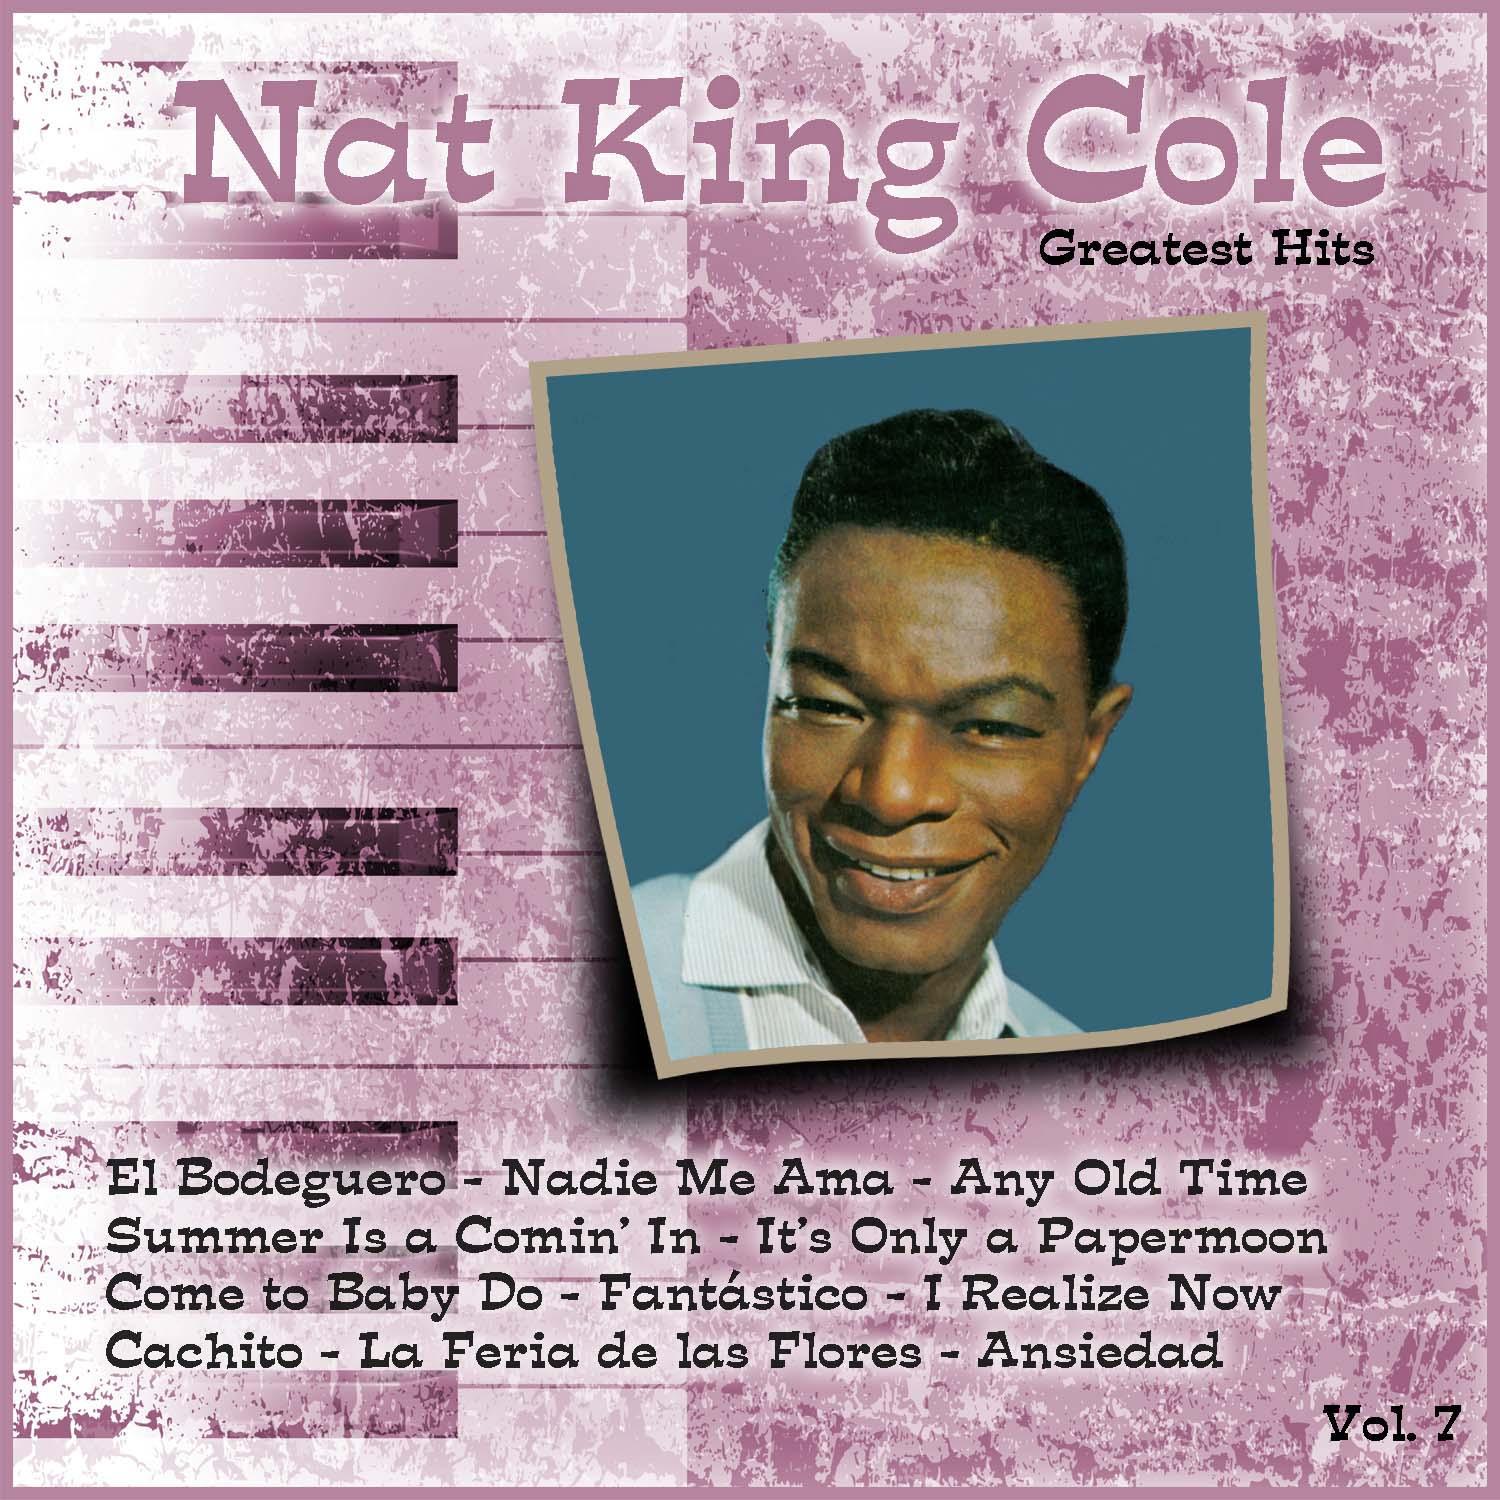 Greatest Hits: Nat King Cole Vol. 7